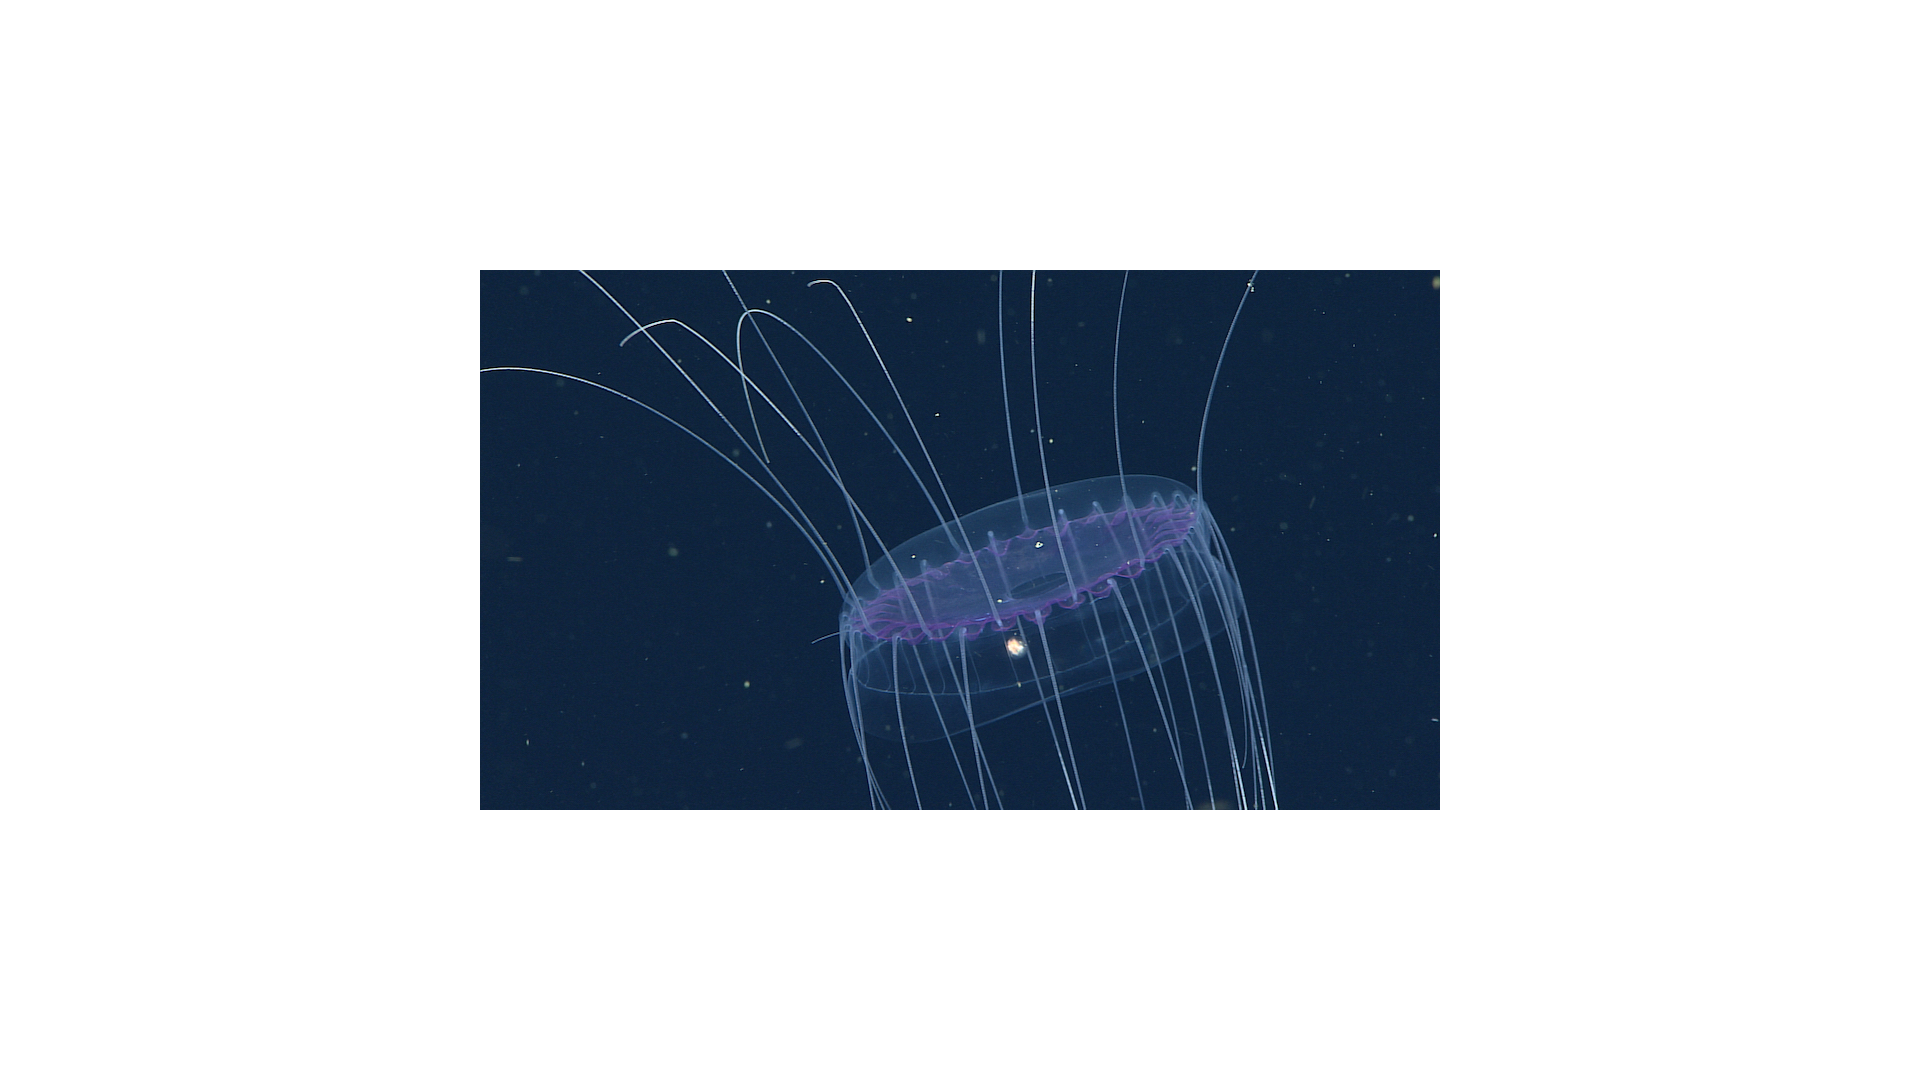 High definition:A dinner plate jelly (Solmissus sp.) filmed in high definition (1920 x 1080 pixels). Image: © 2016 MBARI